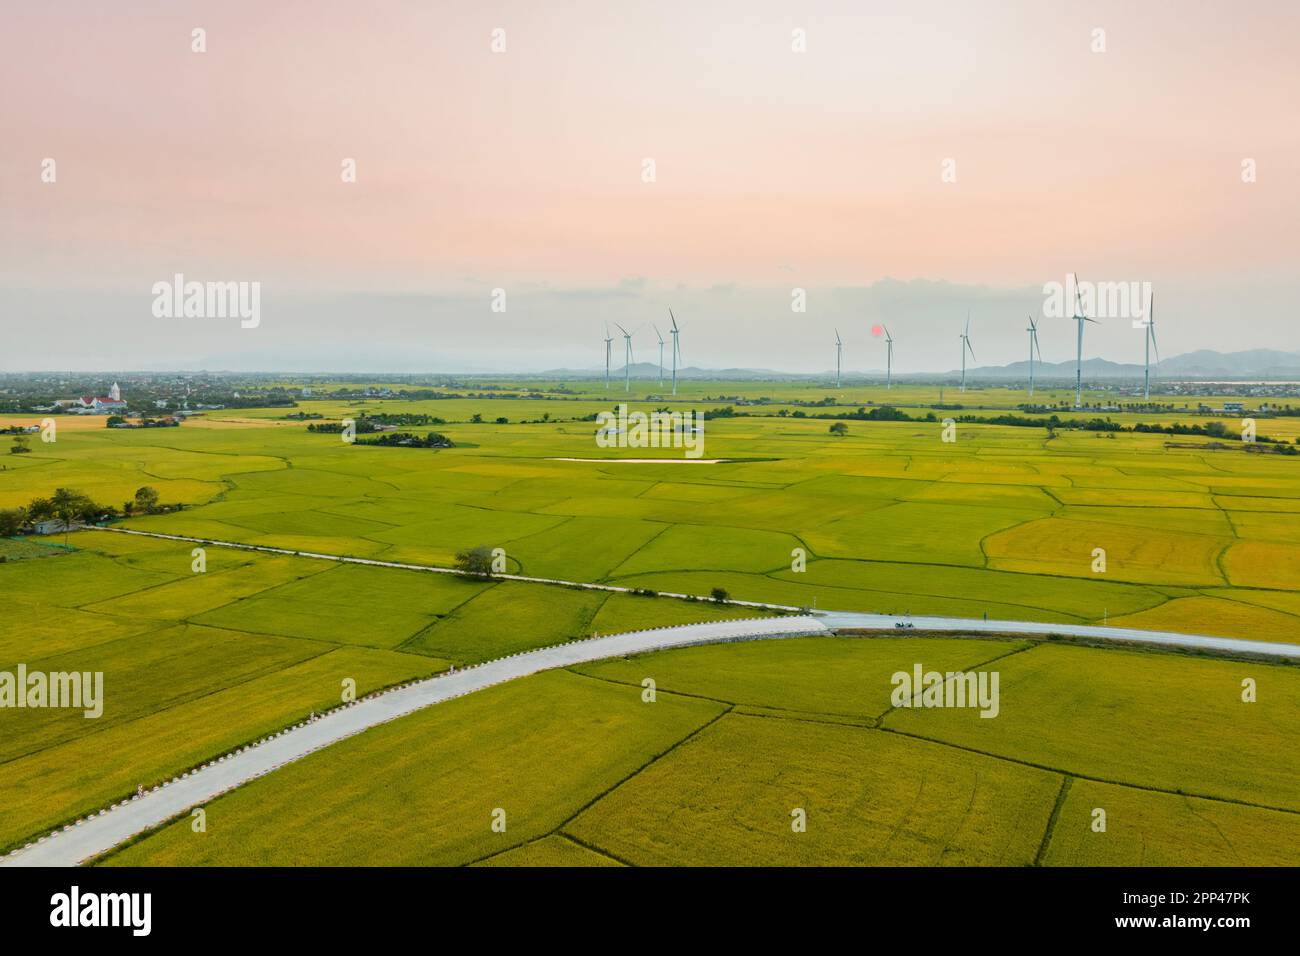 April 8, 2023: rice fields in Phan Rang city are in the harvest season next to wind power poles Stock Photo